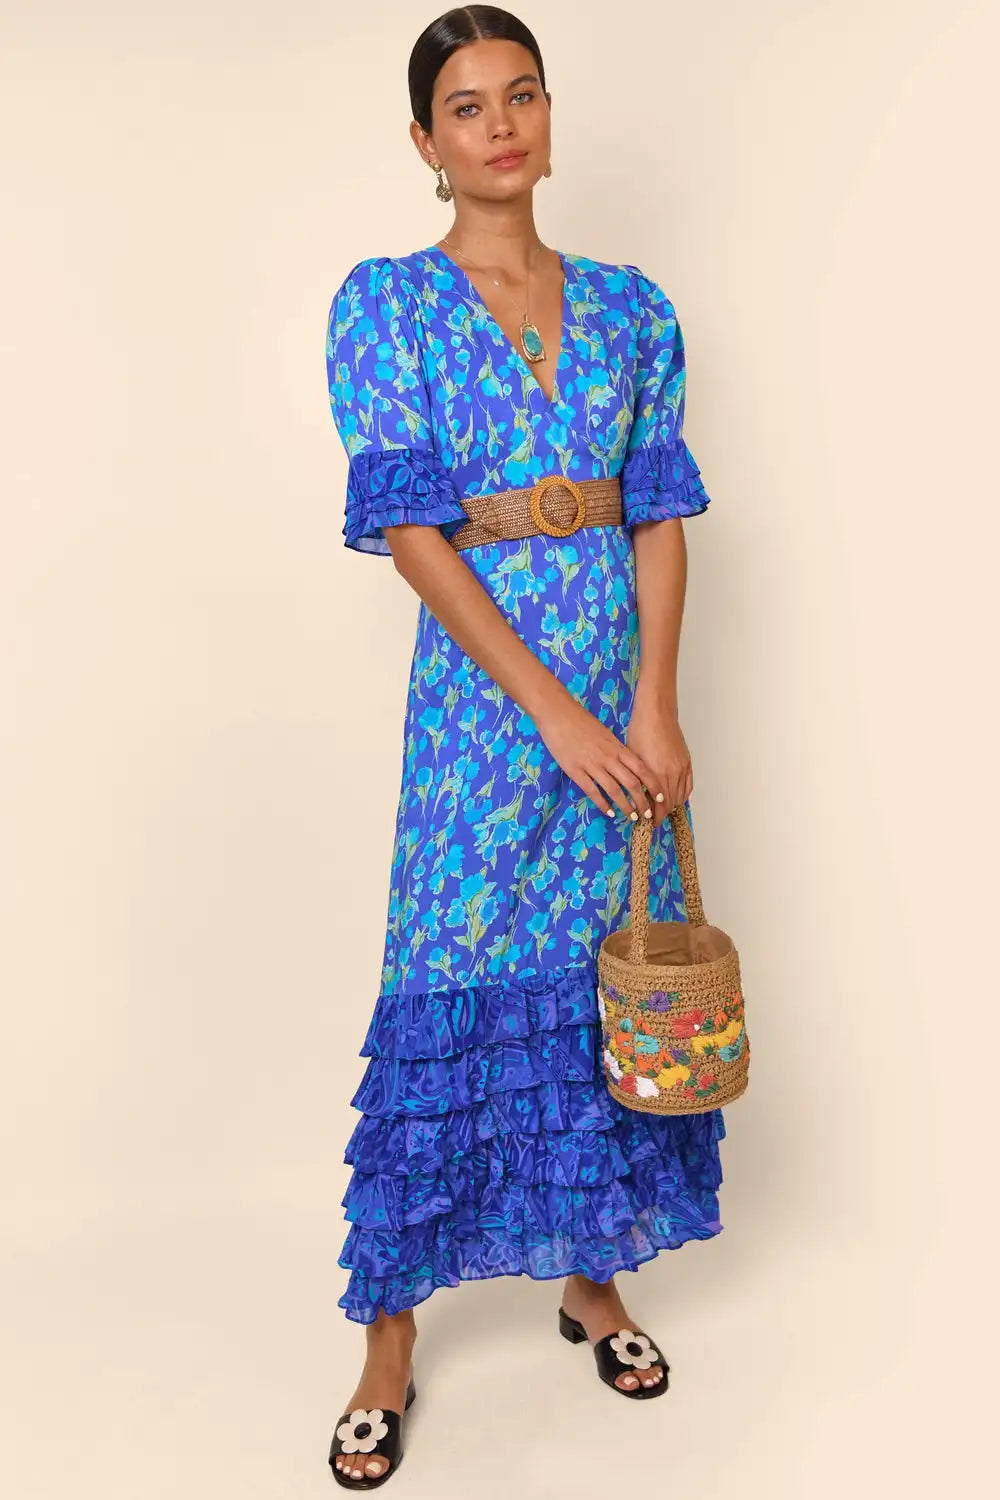 Indulge in the luxurious sophistication of the high-end designer Dress Blue Mari. Handmade with impeccable attention to detail, this long floral dress is perfect for any occasion. From casual shopping trips to elegant banquets, you'll look and feel stunning in the blue floral design. Elevate your wardrobe with this must-have piece.